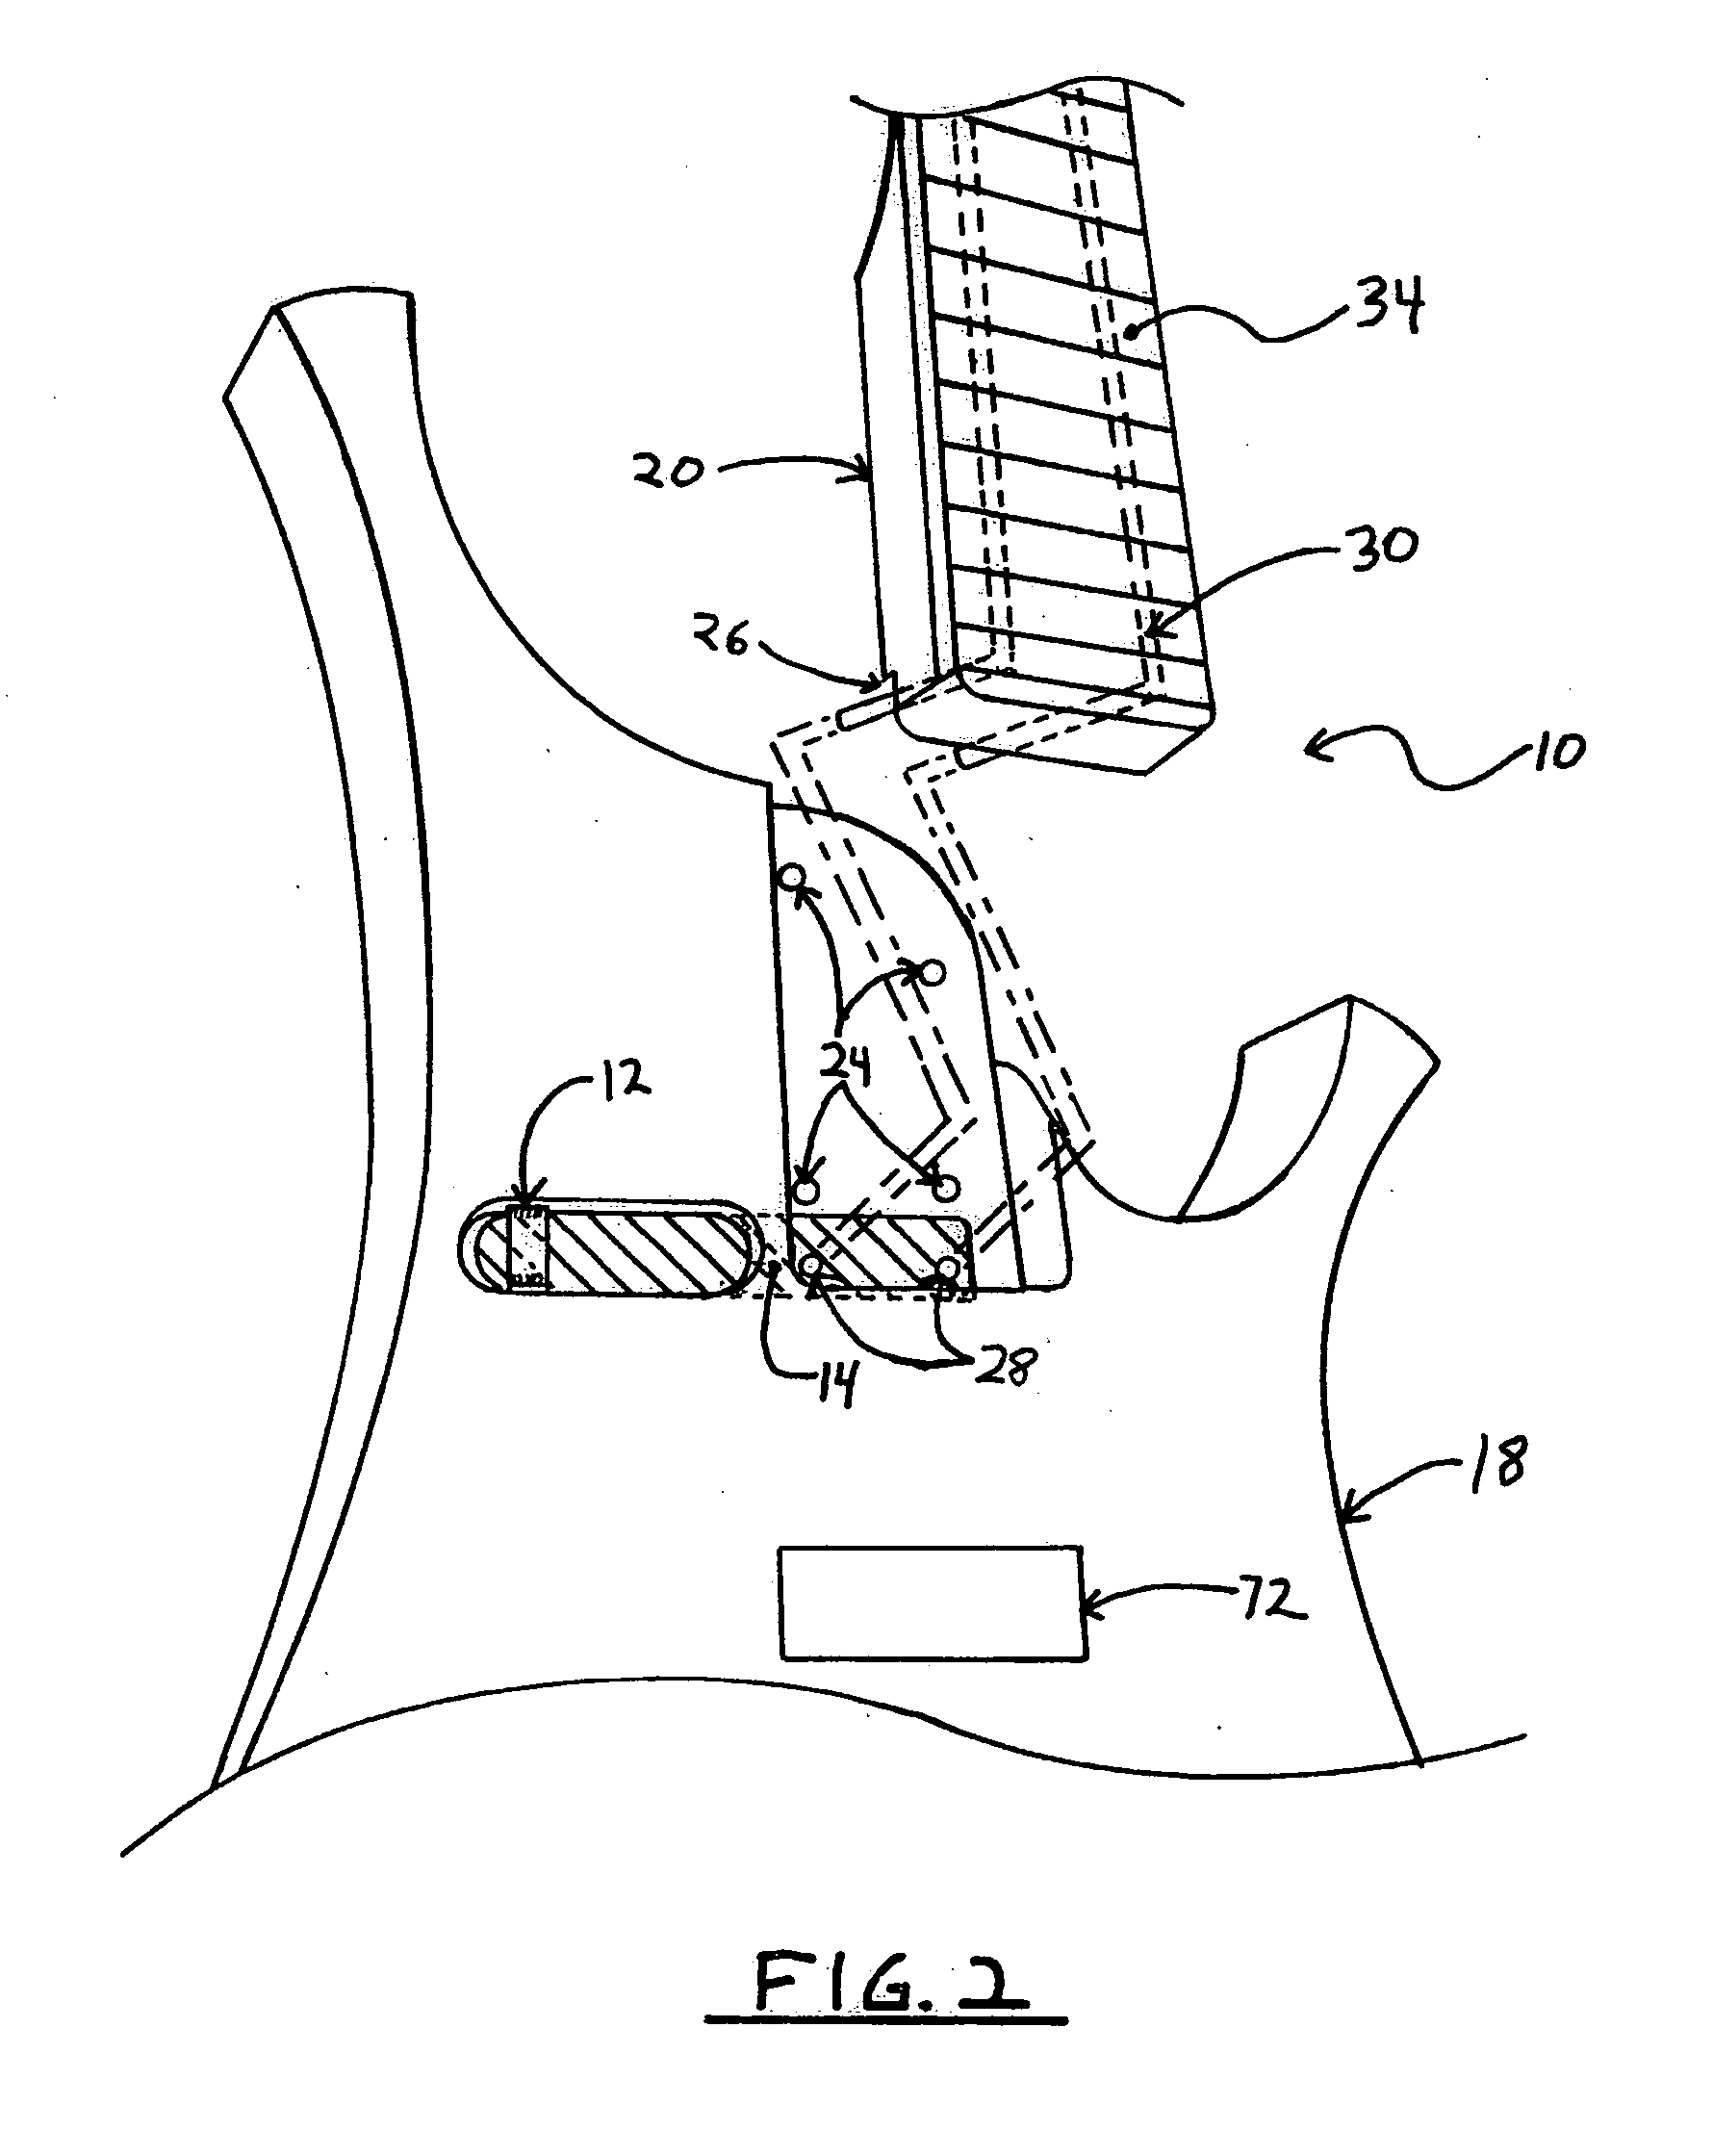 Stringed musical instrument convertible between fretted and fretless playing configurations